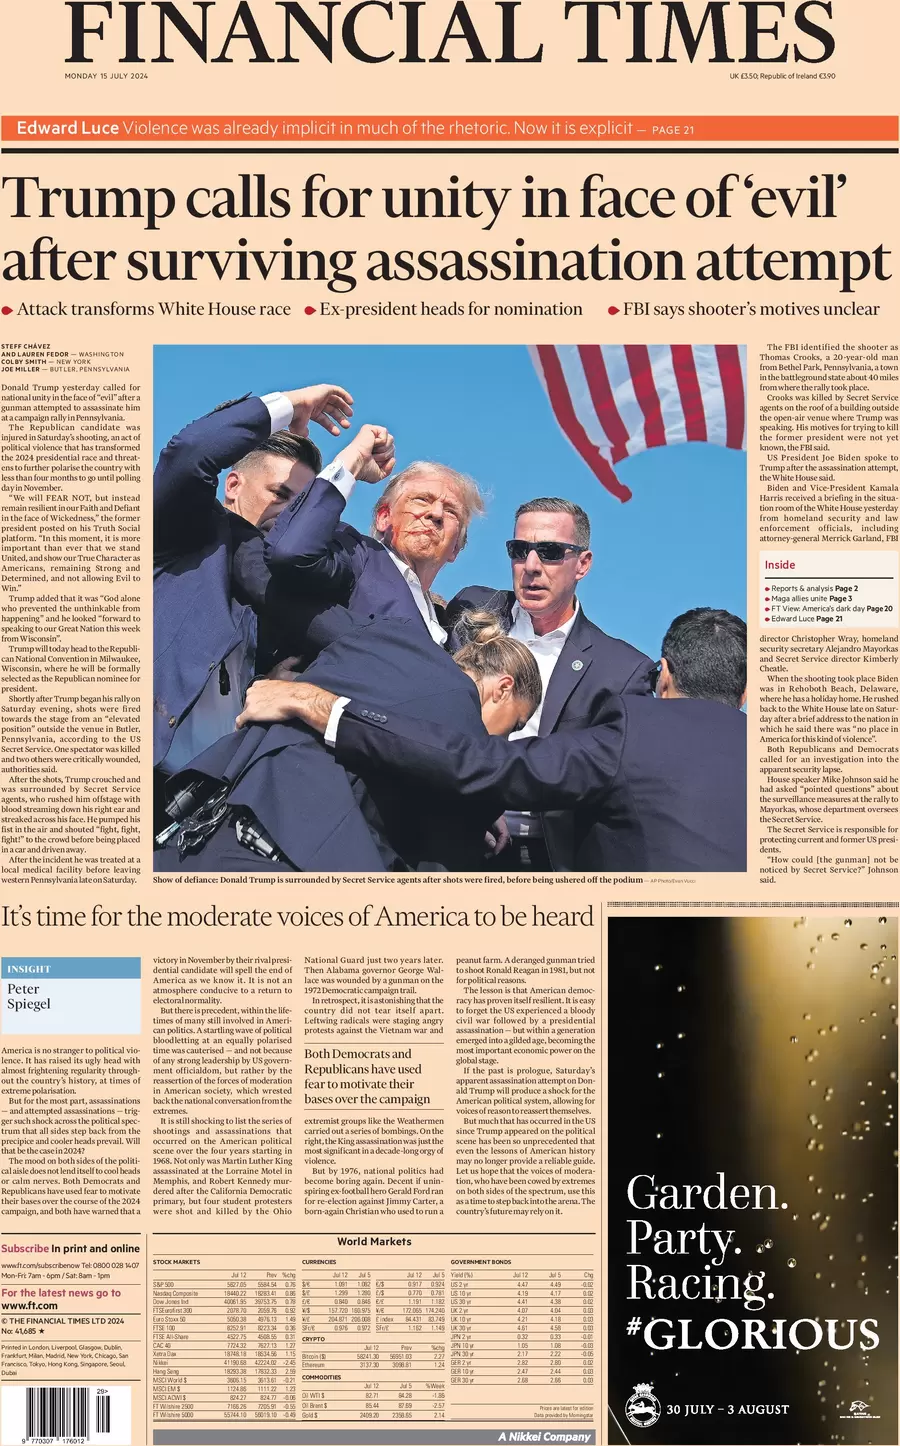 financial times 002422859 - WTX News Breaking News, fashion & Culture from around the World - Daily News Briefings -Finance, Business, Politics & Sports News